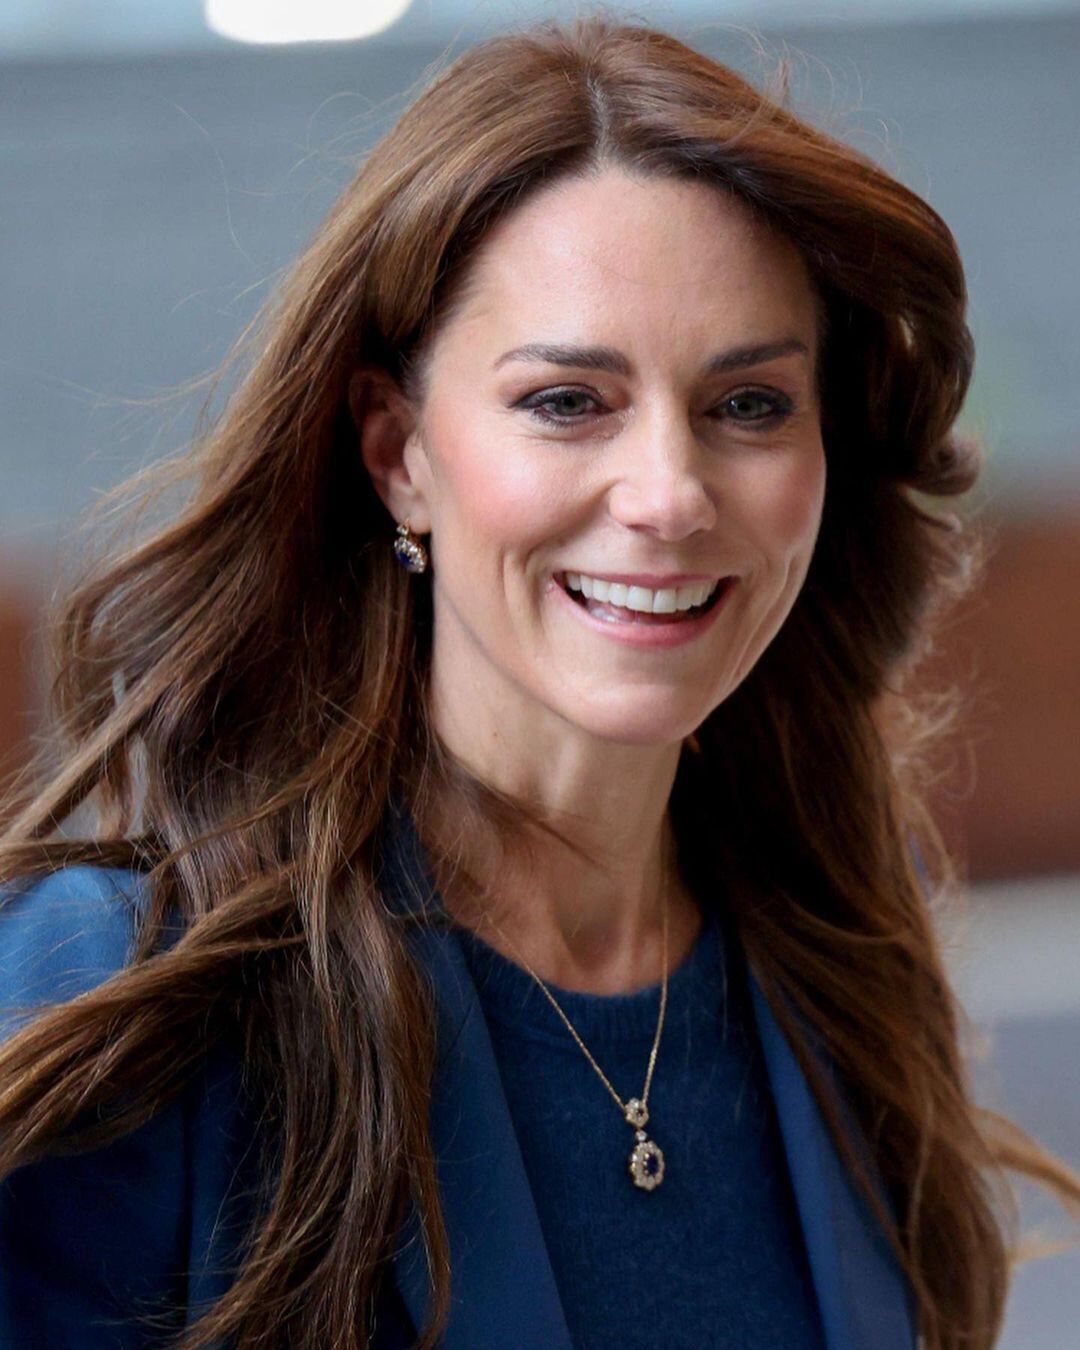 Kate Middleton teaches how to wear high heels in an easy and elegant ...